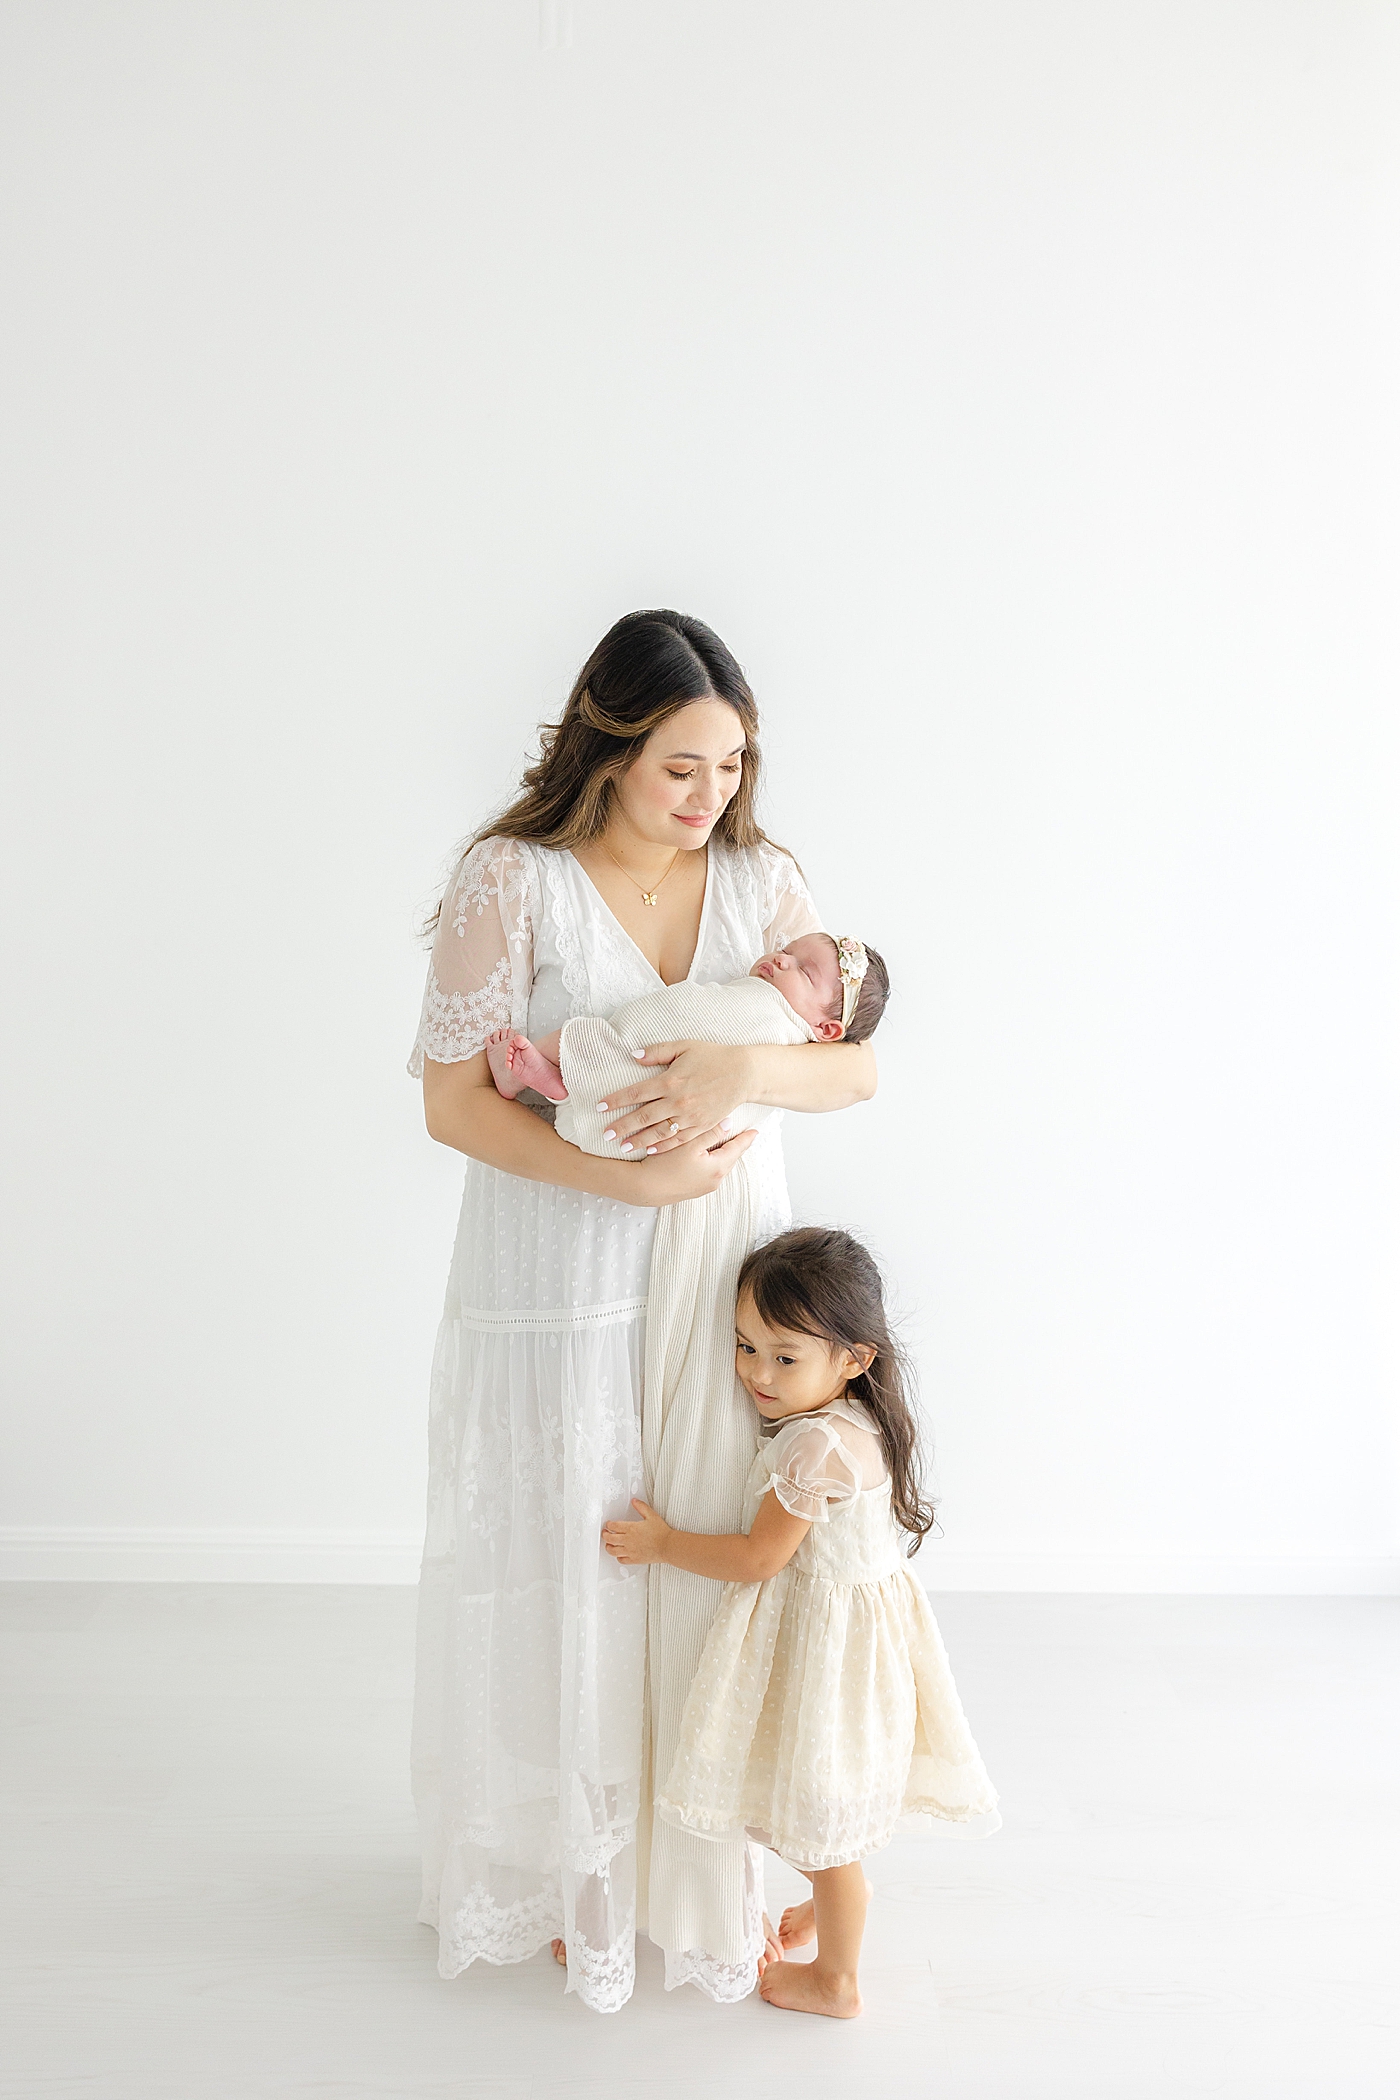 Mom in white holding her new baby girl with daughter during her Austin Studio Newborn Session | Photo by Sana Ahmed Photography